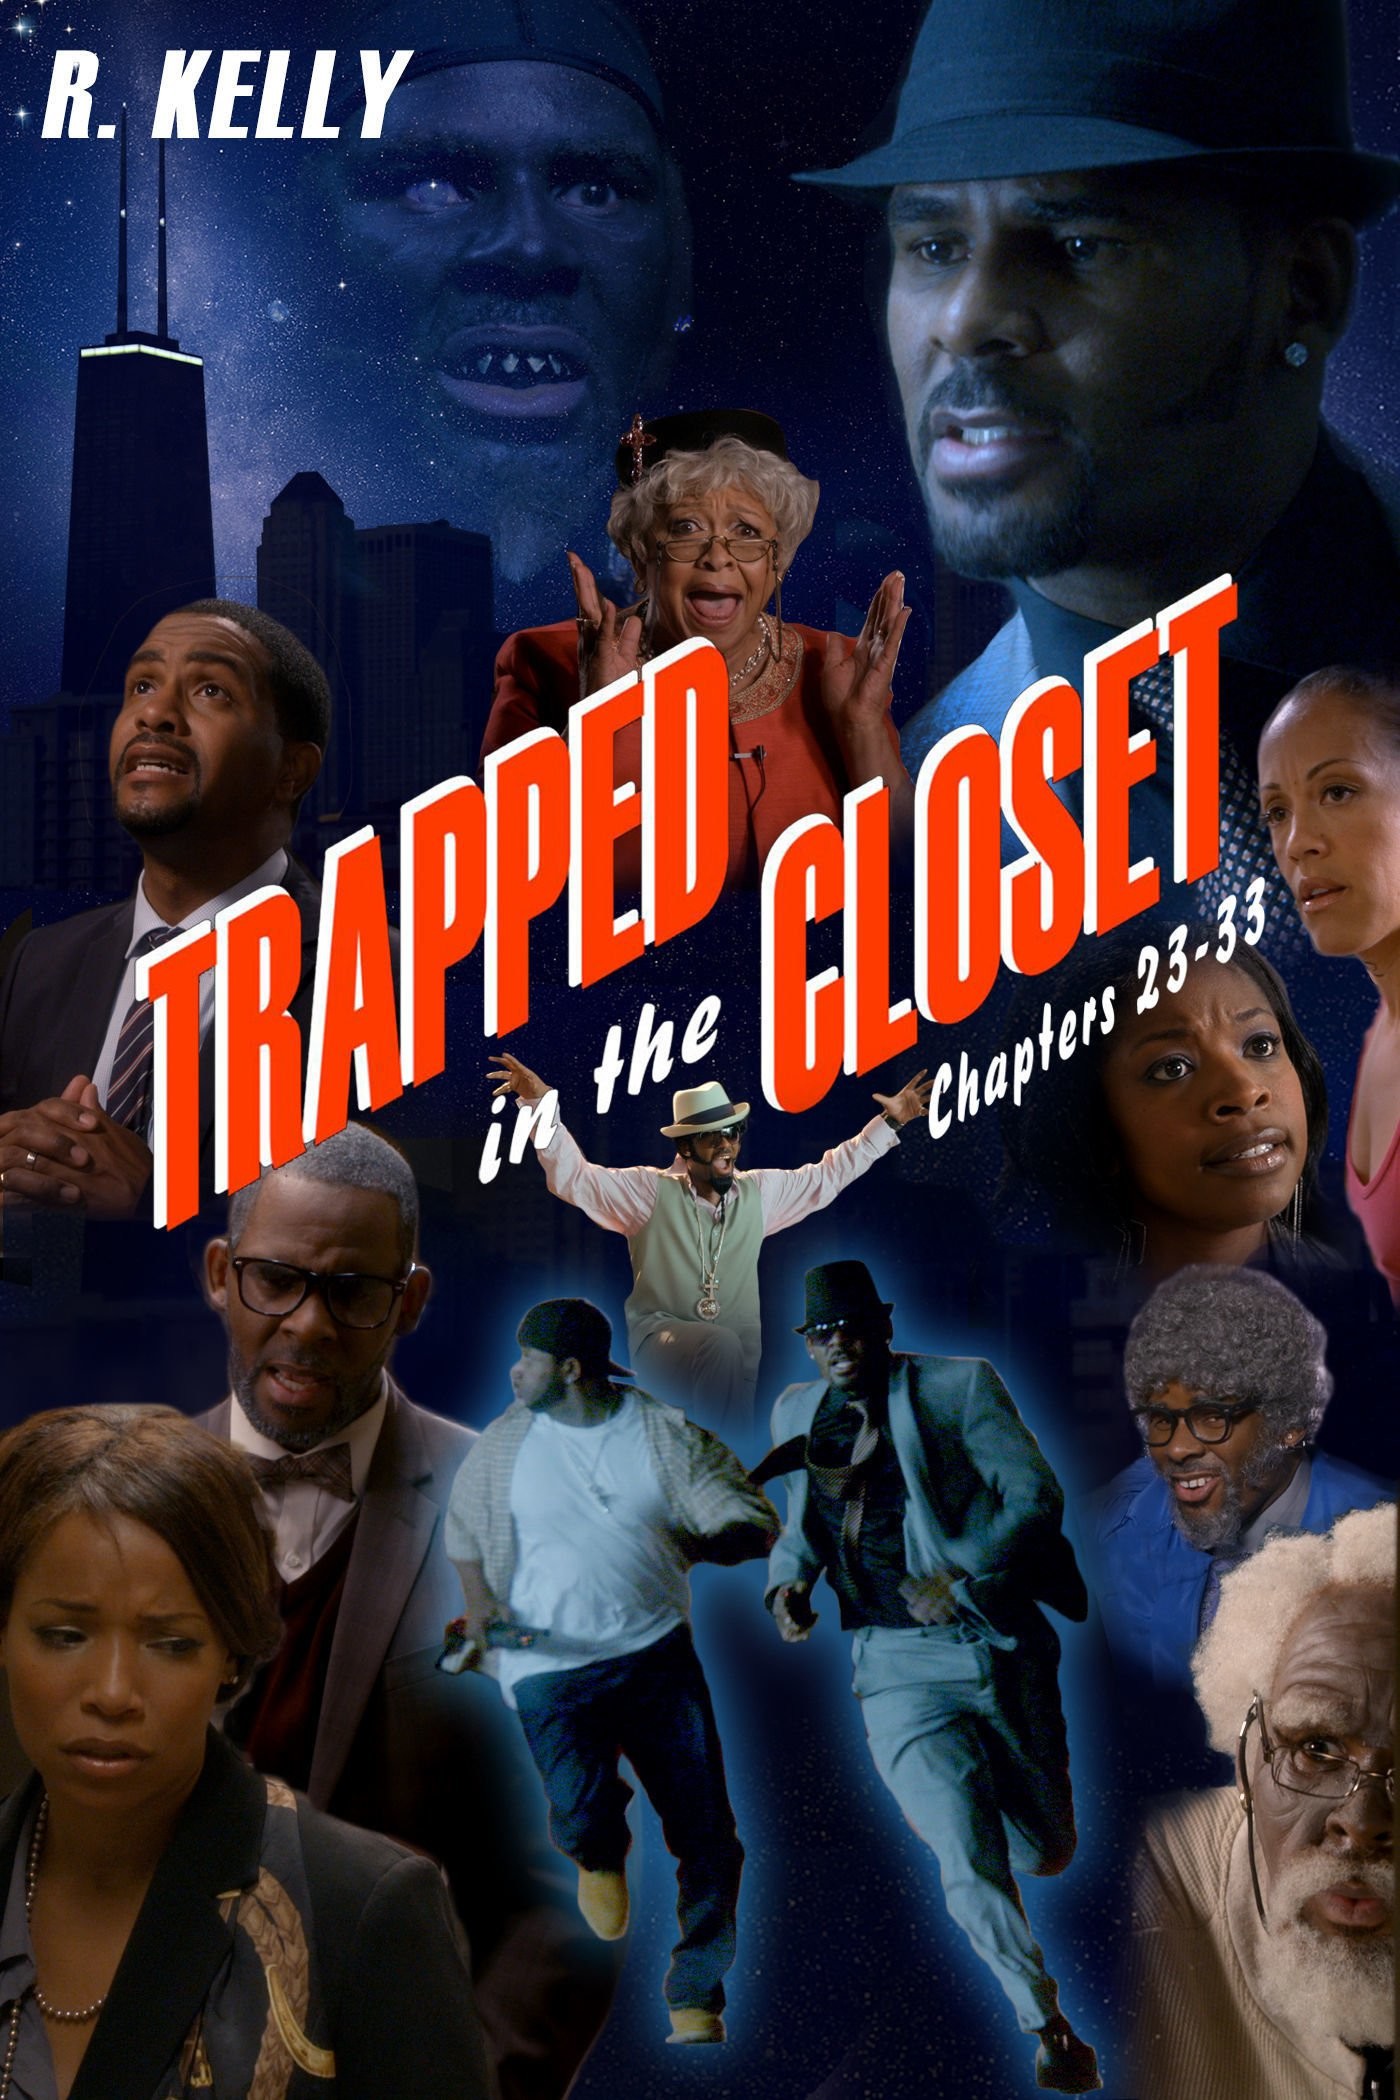 R Kelly Trapped In The Closet Full Movie Download